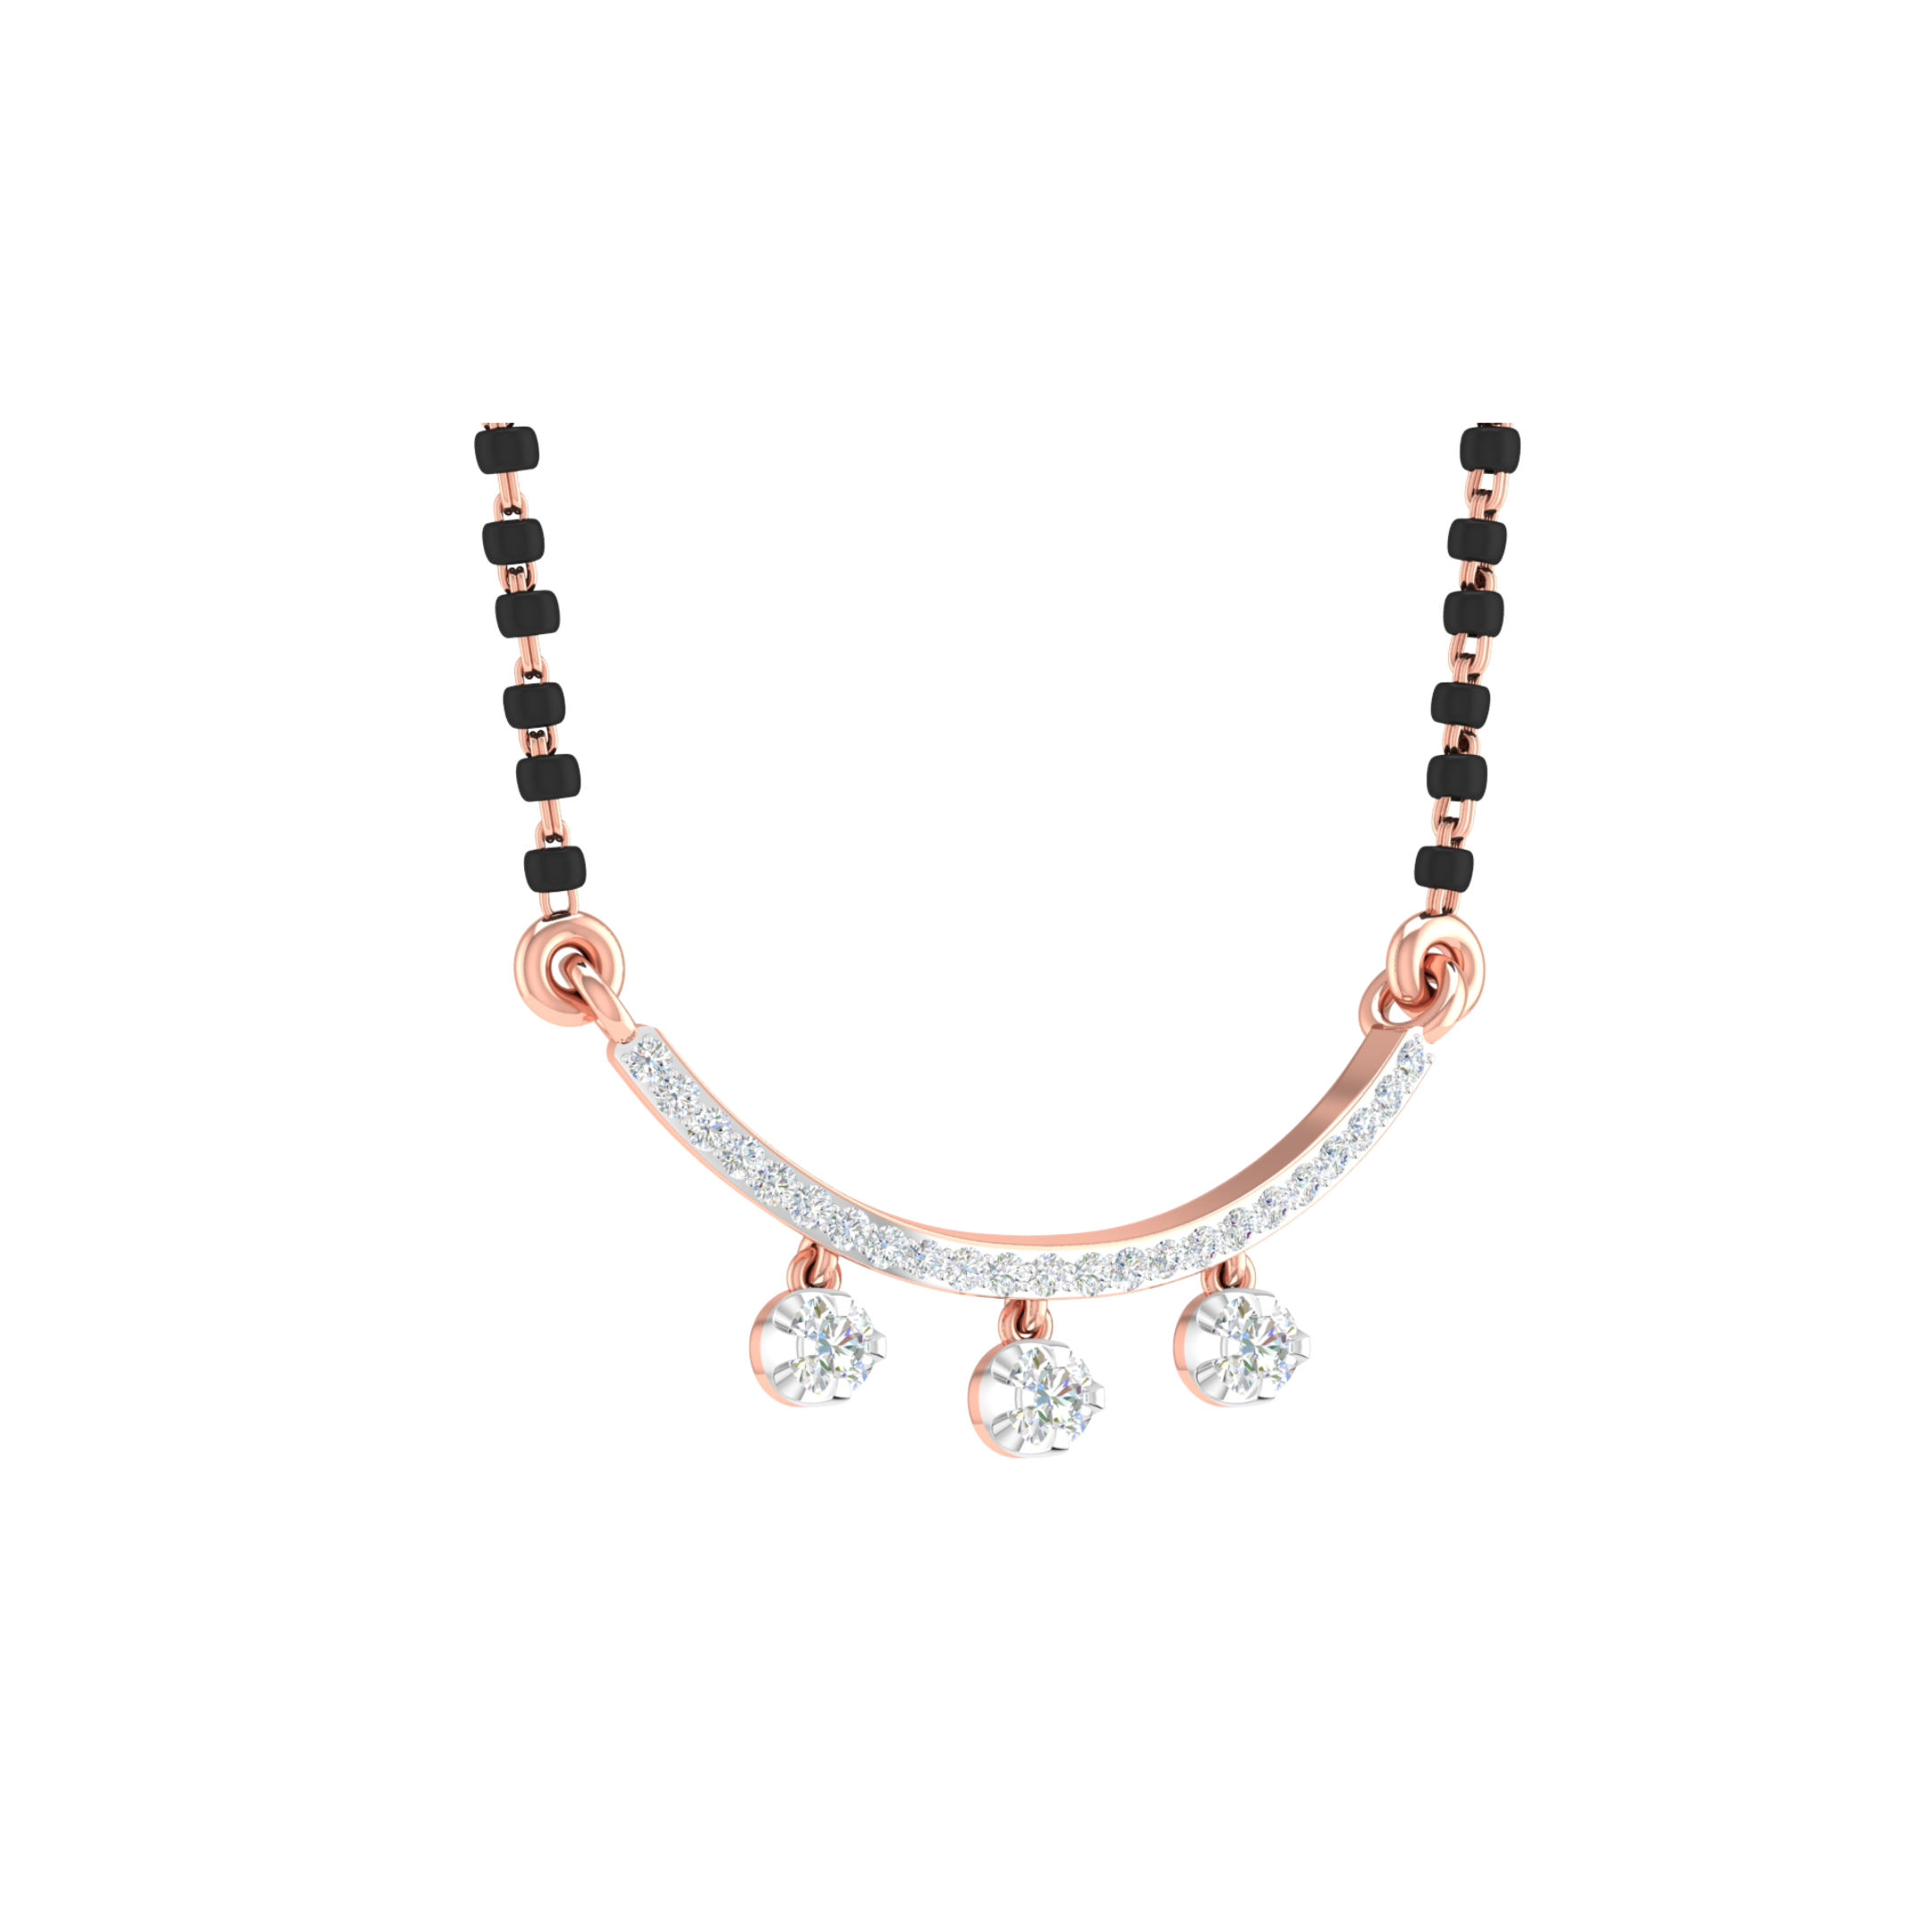 ROSE GOLD 18KT MICHELLE REAL DIAMOND MANGALSUTRA